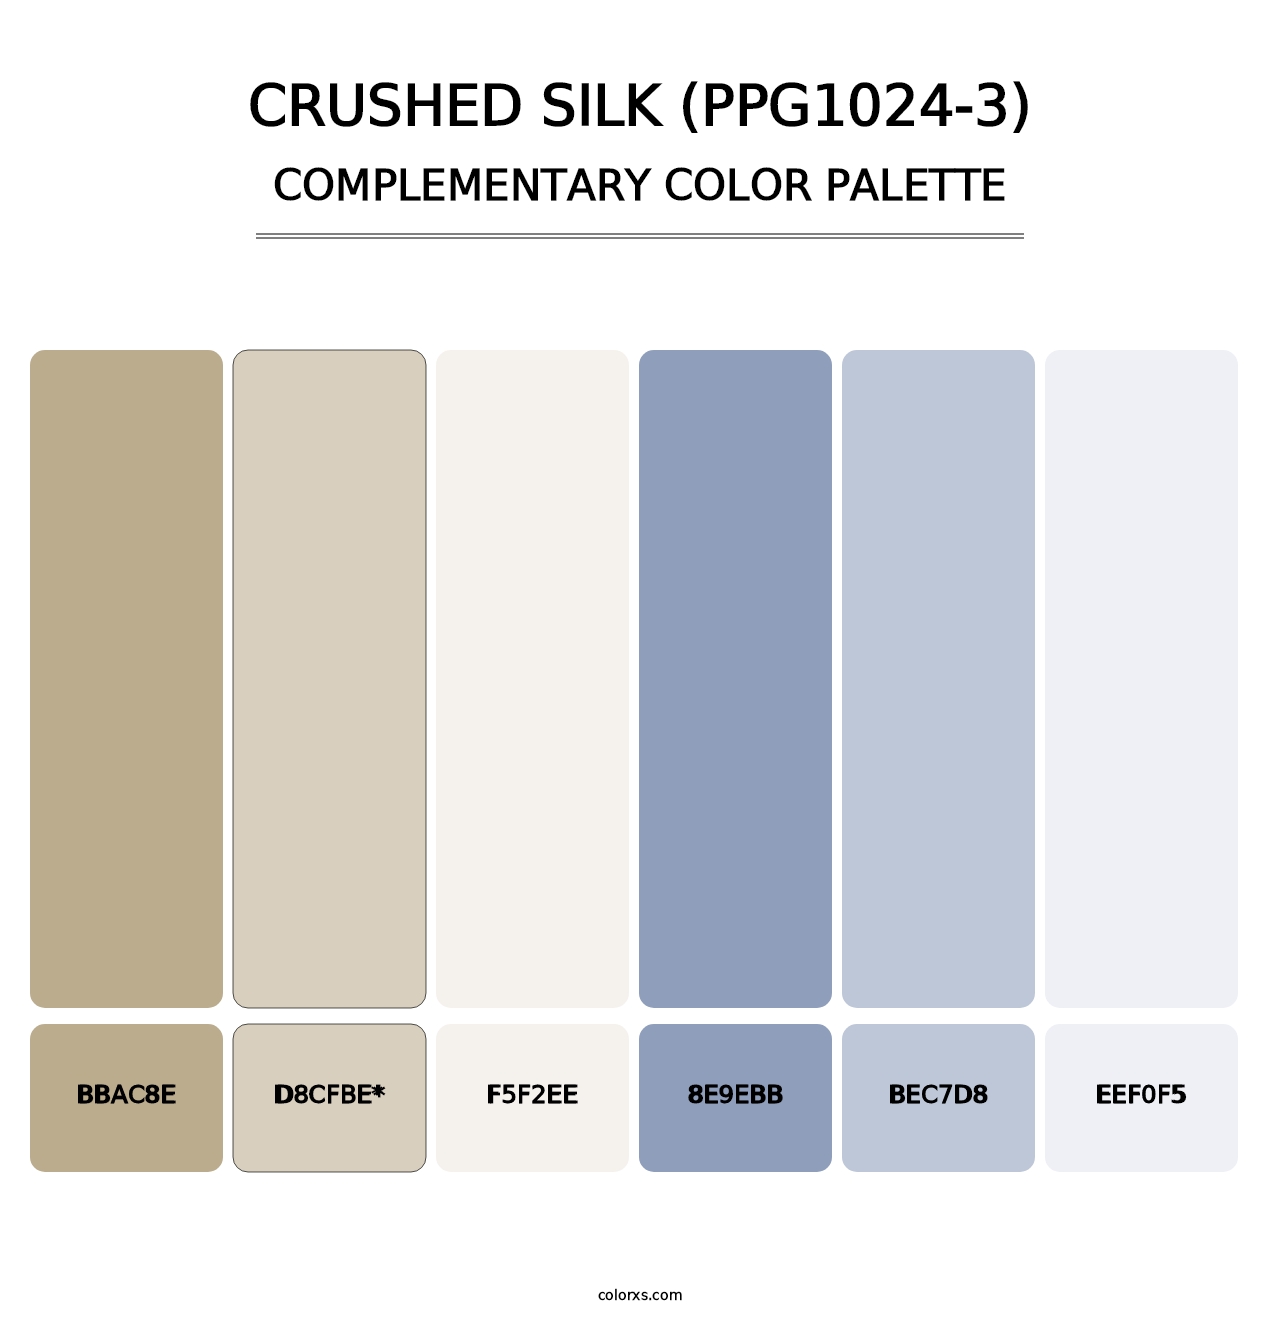 Crushed Silk (PPG1024-3) - Complementary Color Palette